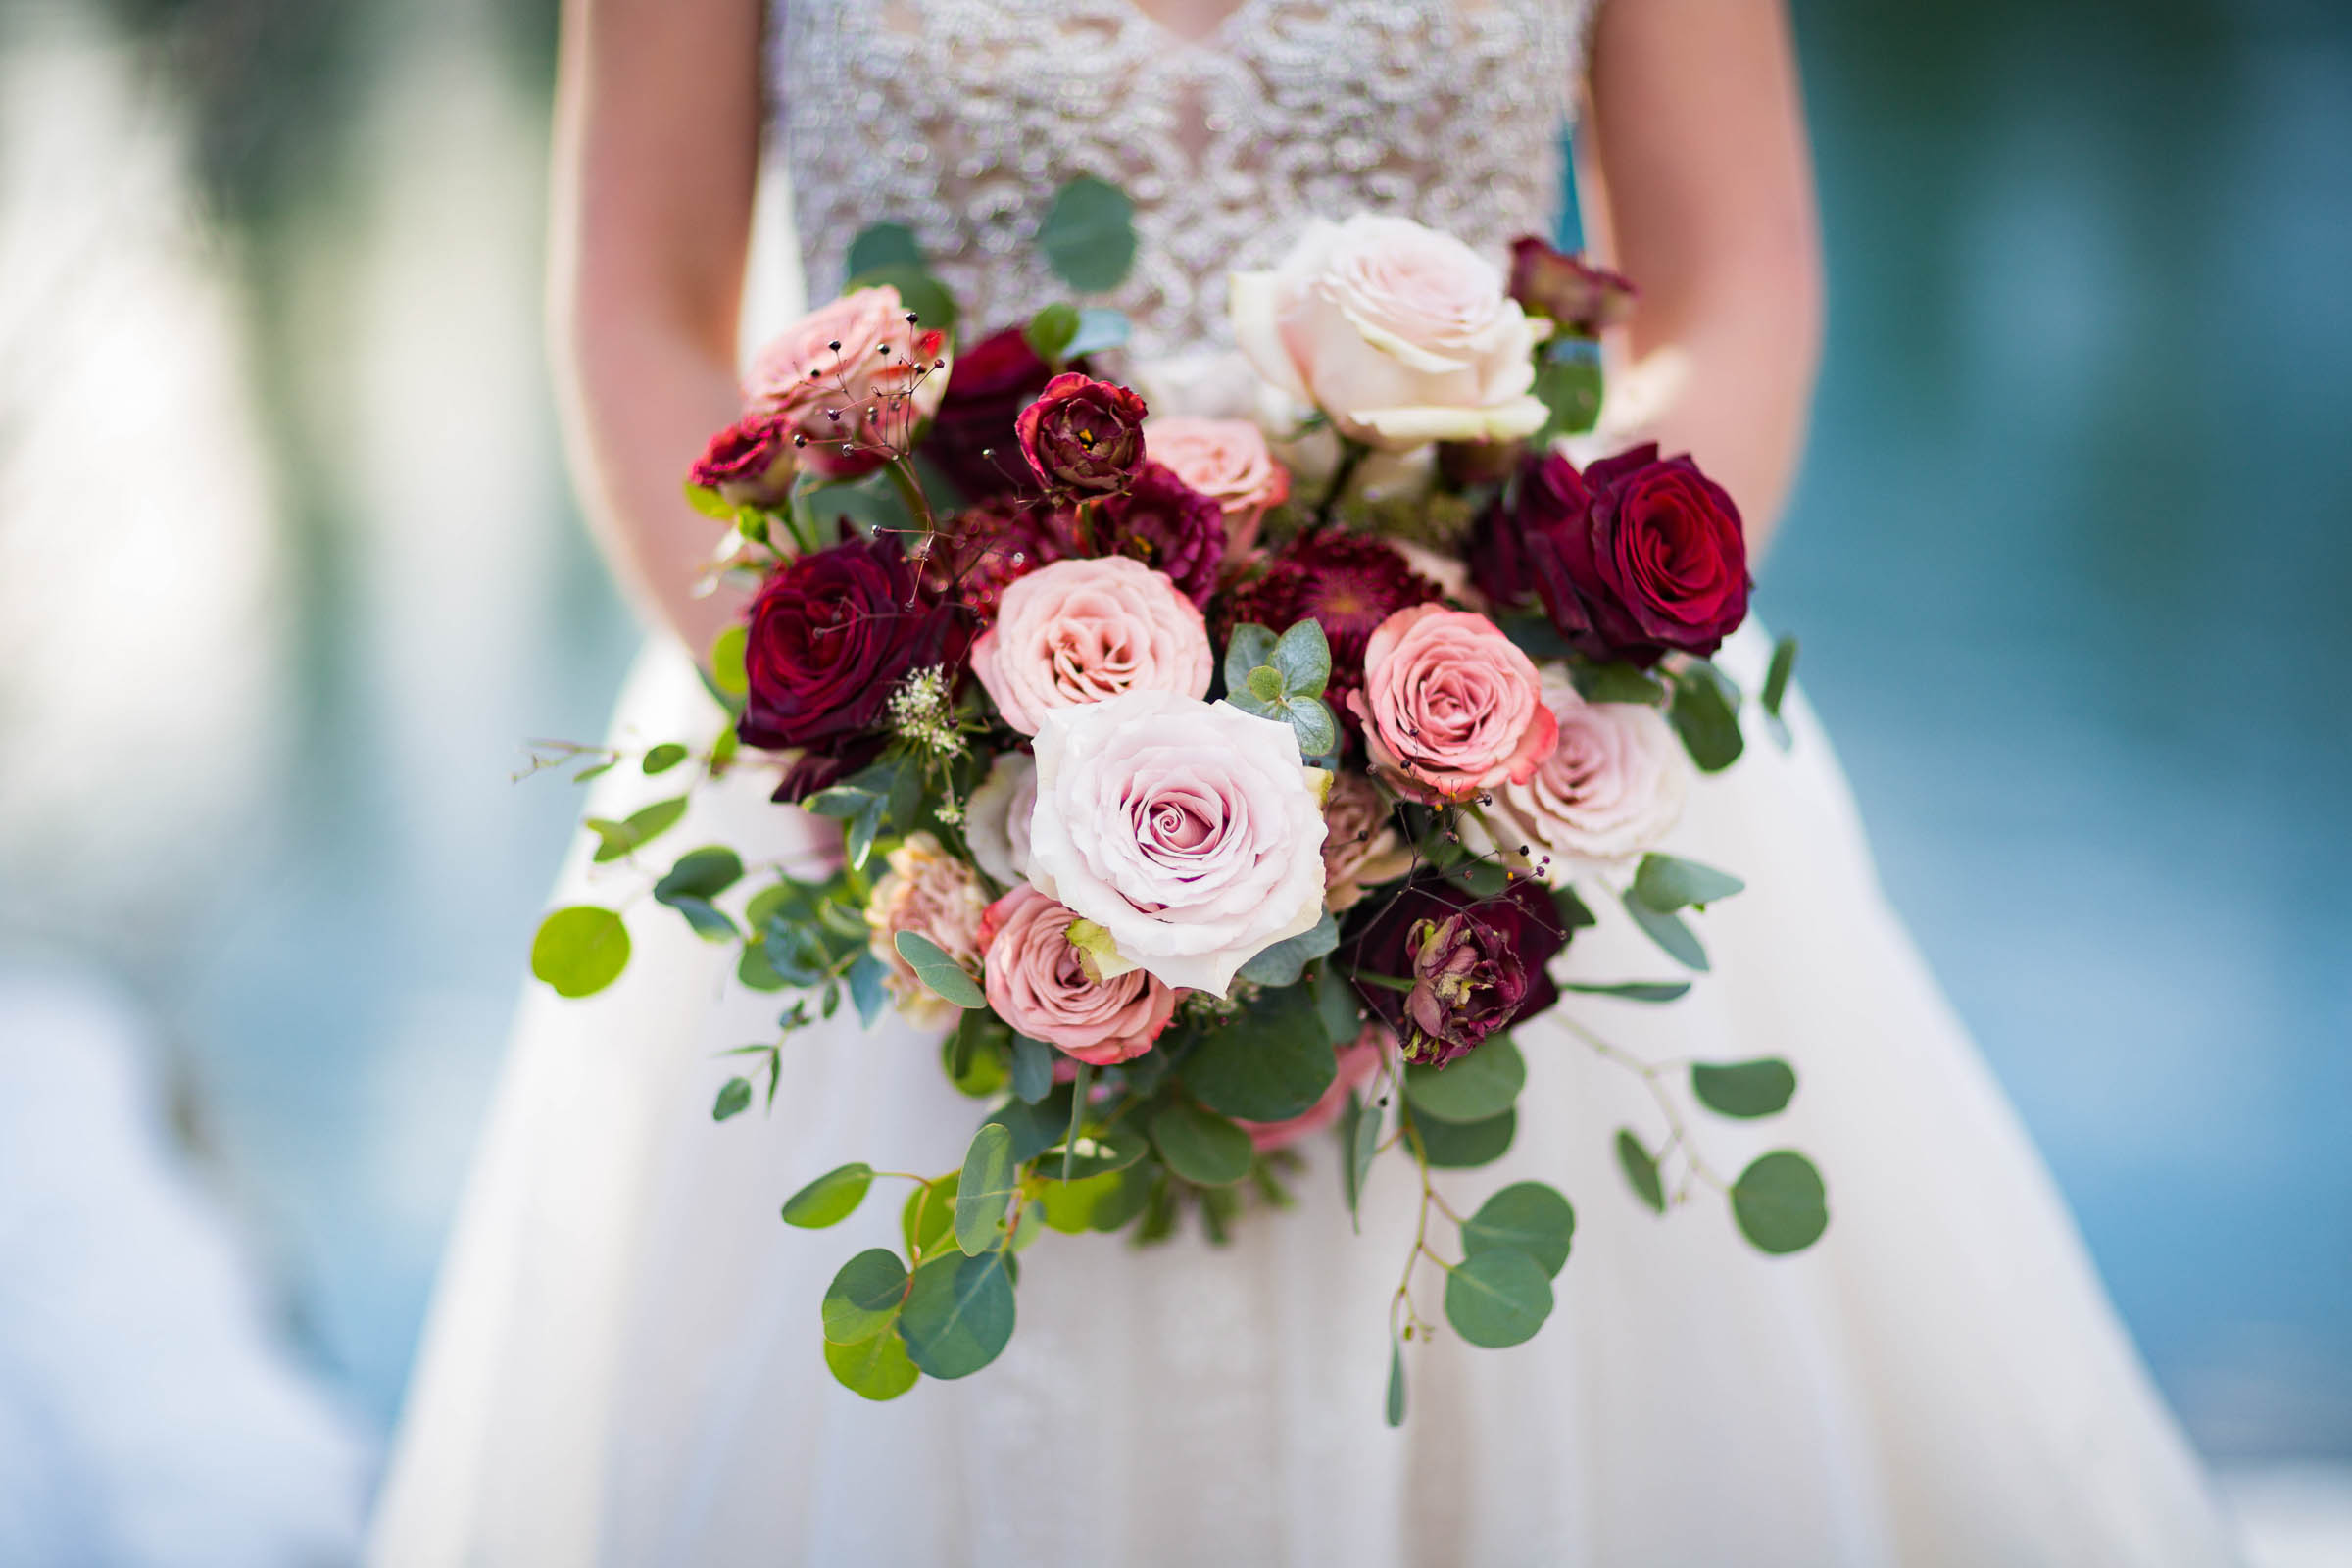 Bride holding wedding bouquet of red roses, blush roses and white roses with greenery